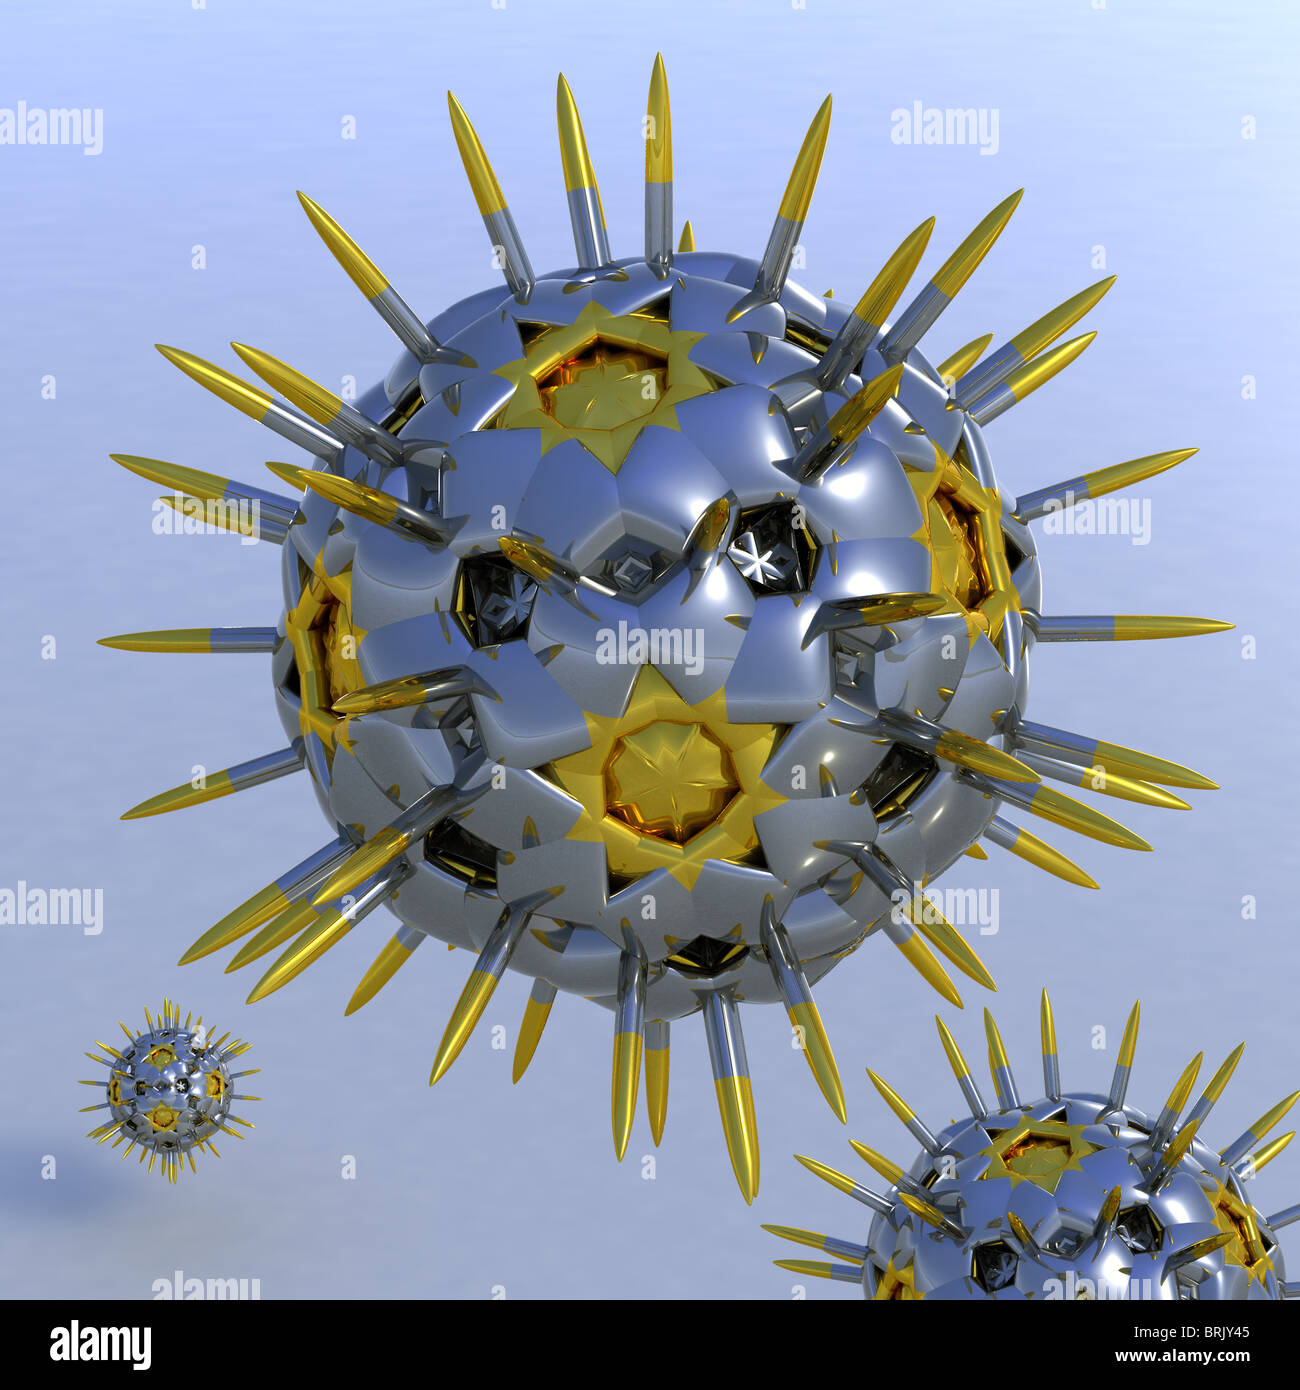 Close-up of metallic, shiny objects hovering over a blue, mildly reflecting surface, resembling viruses with golden spikes Stock Photo